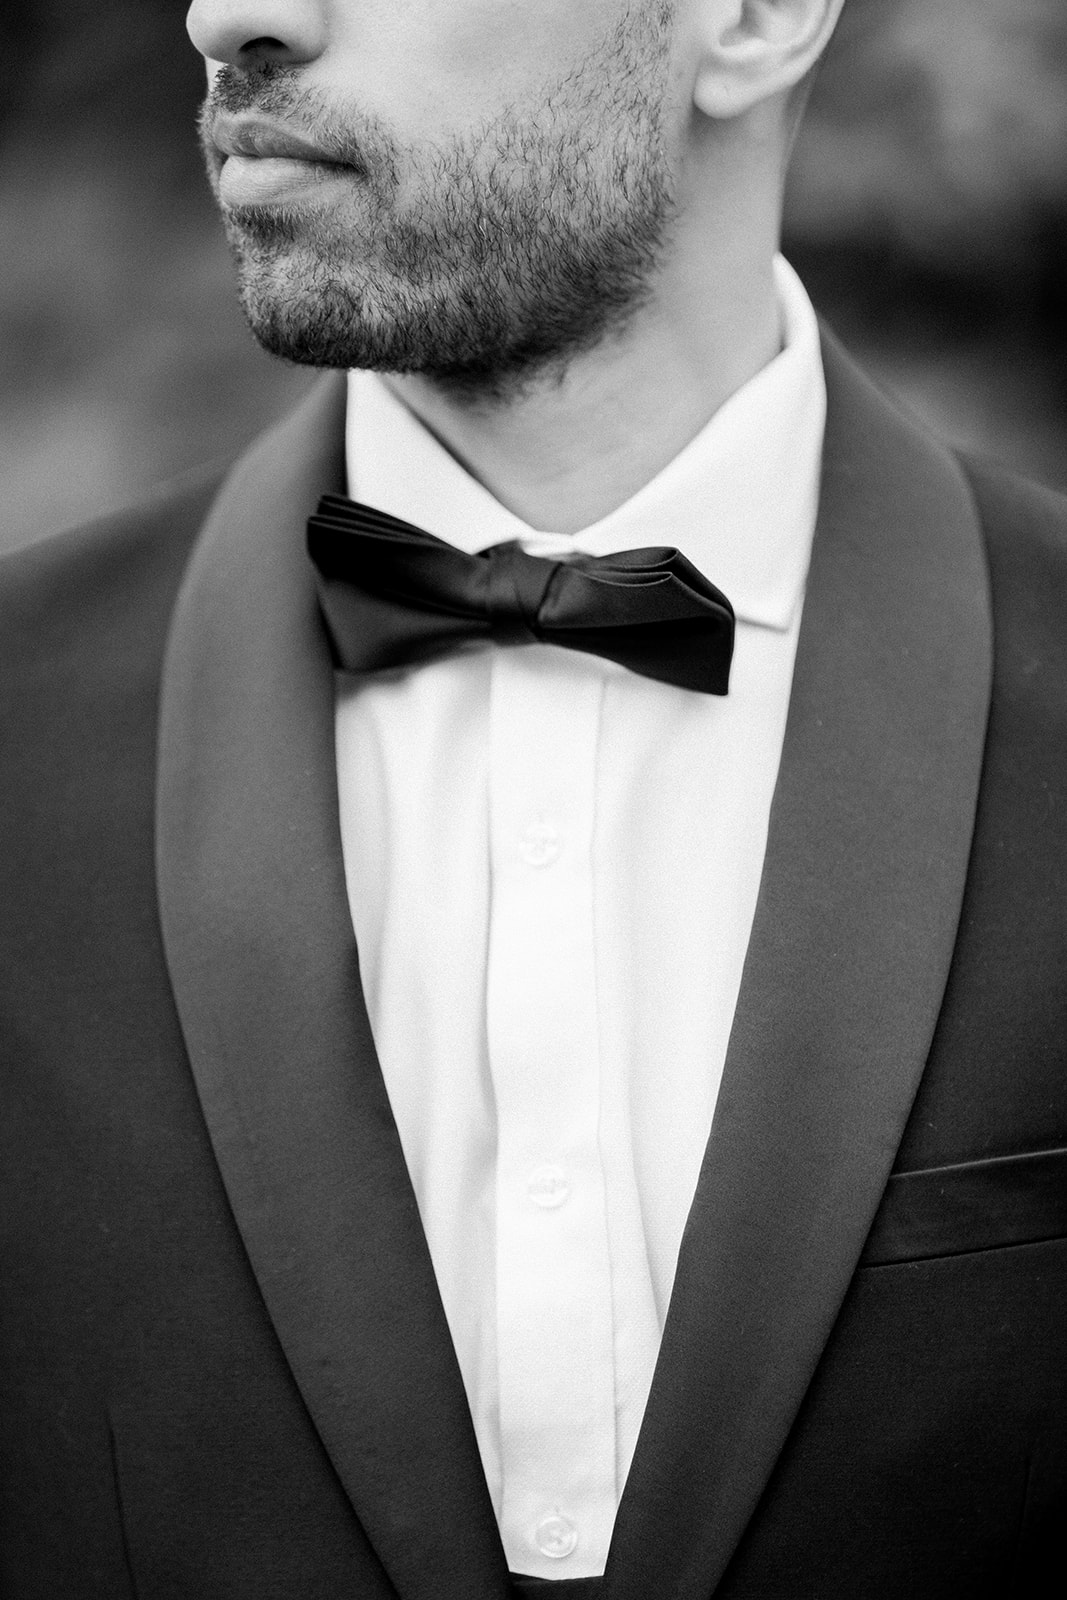 Classic and sophisticated groom's look, complete with a Paul Andrew tailored suit and a crisp white shirt.